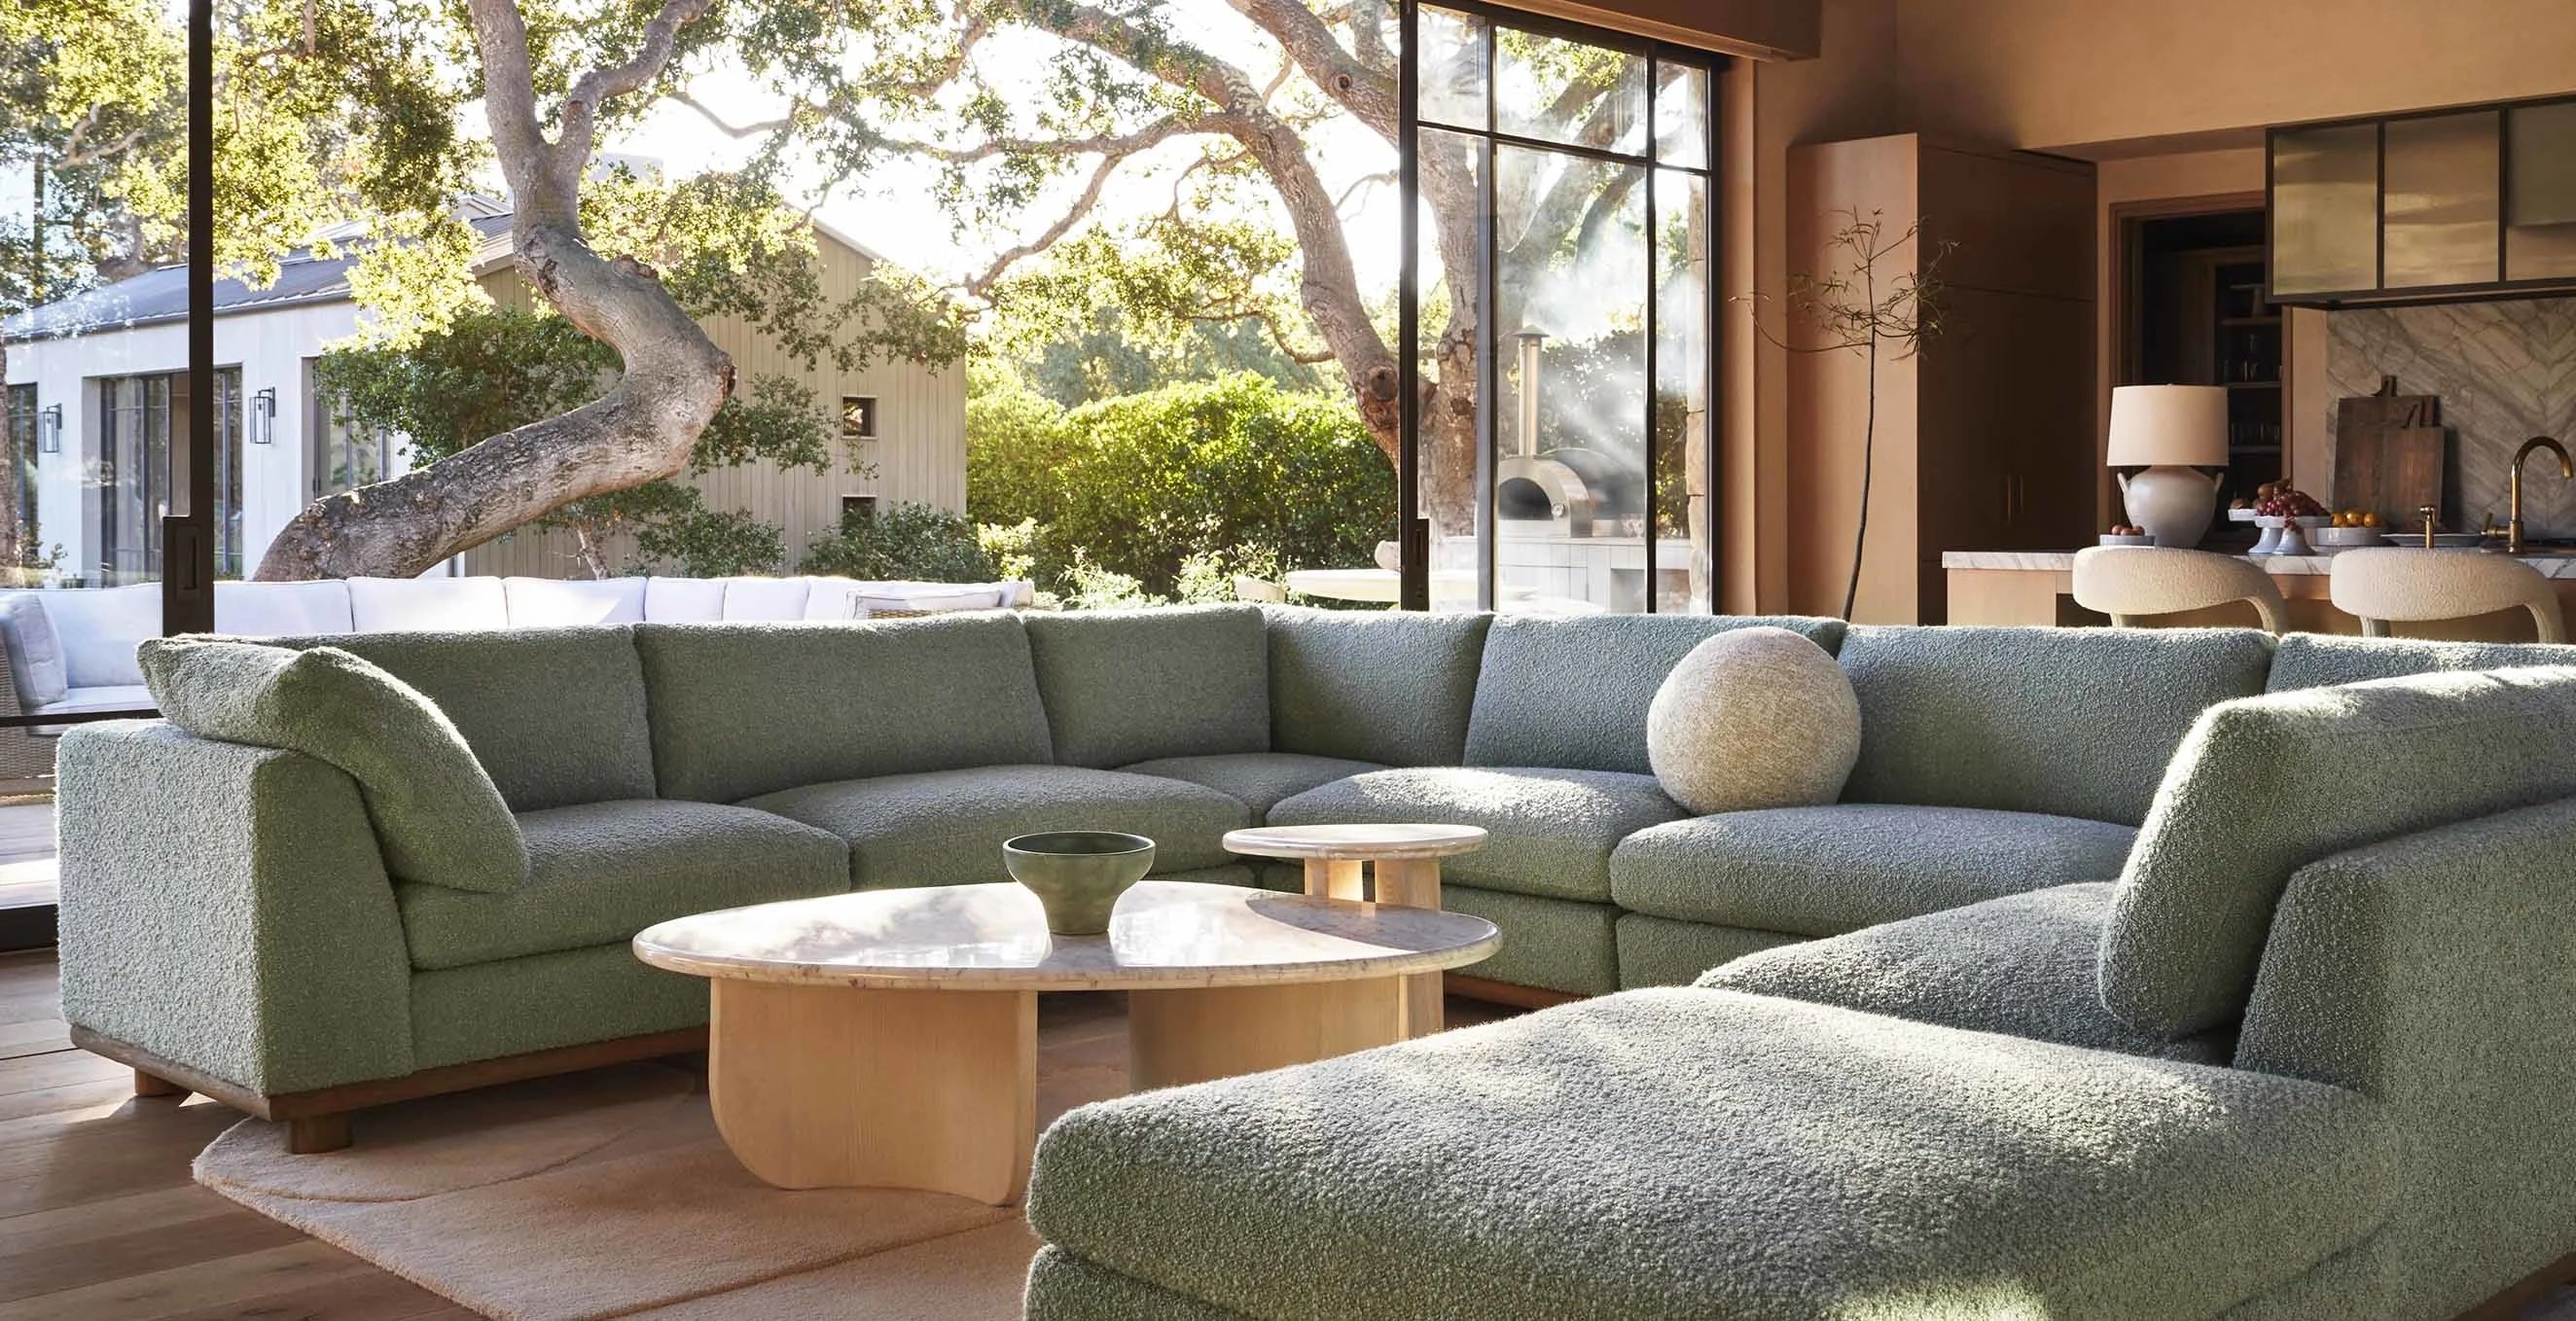 A spacious living room features a large, green sectional sofa arranged in an L-shape, centered around round, light-colored coffee tables. Large windows offer an unobstructed view of a lush, sunny outdoor area with trees and a building in the background.